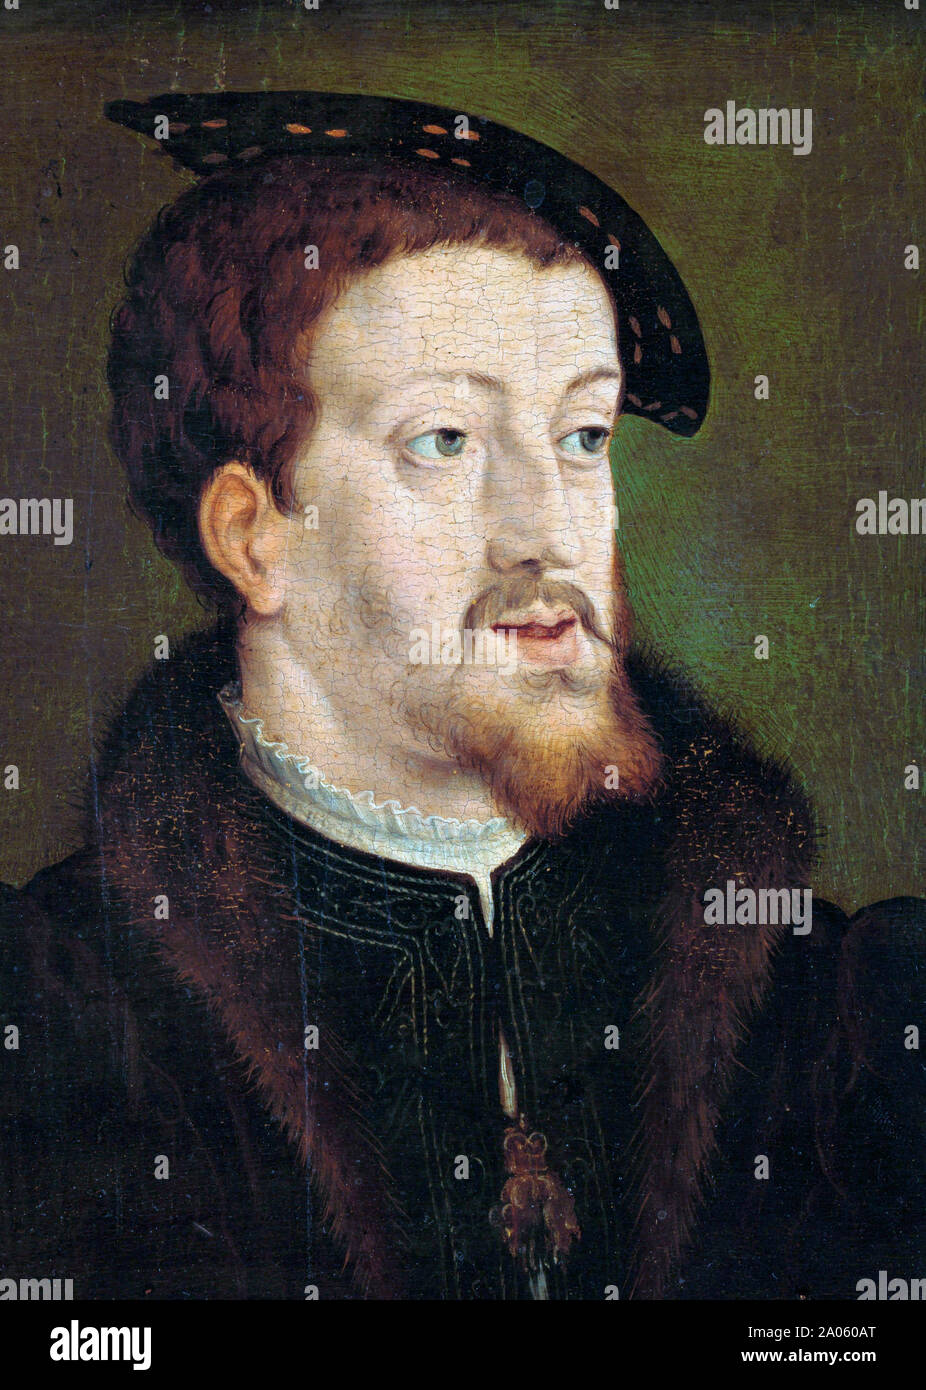 Charles V, 1500-1558.  Emperor of the Holy Roman Empire.  Carlos V.  King of Spain as Charles I.  Carlos I.   After a painting in the Rijksmuseum, Amsterdam, Netherlands in the manner of Jan Cornelisz Vermeyen. Stock Photo